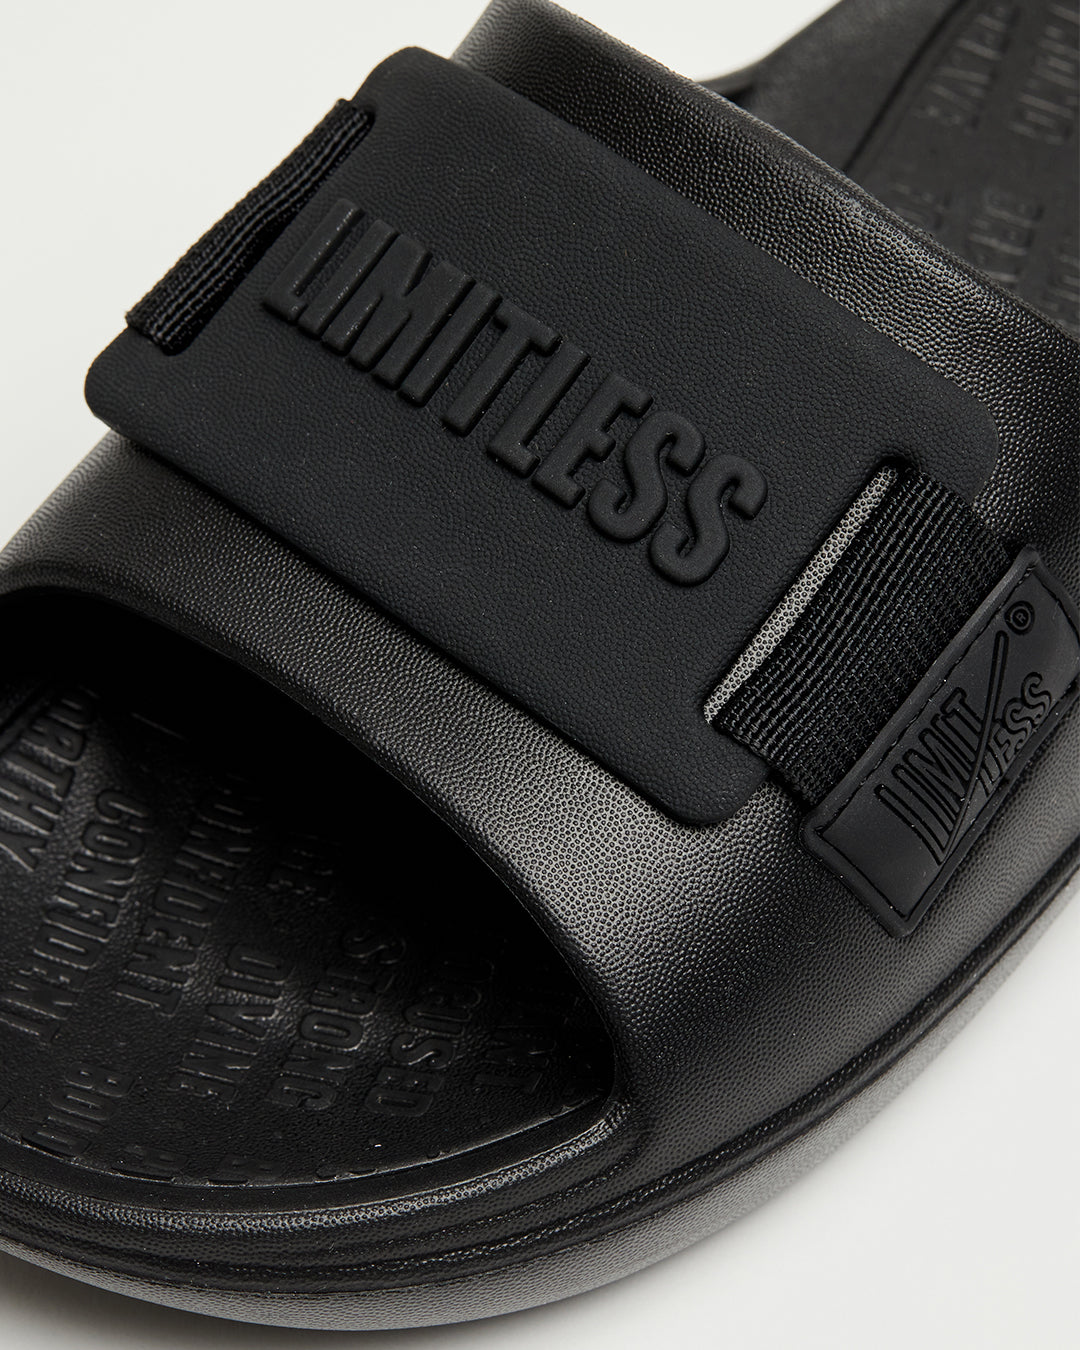 LIMITLESS SLIDES™ WITH ESSENTIAL TIBAH™ QUAD - MISSION HILLS HIGH SCHOOL EDITION